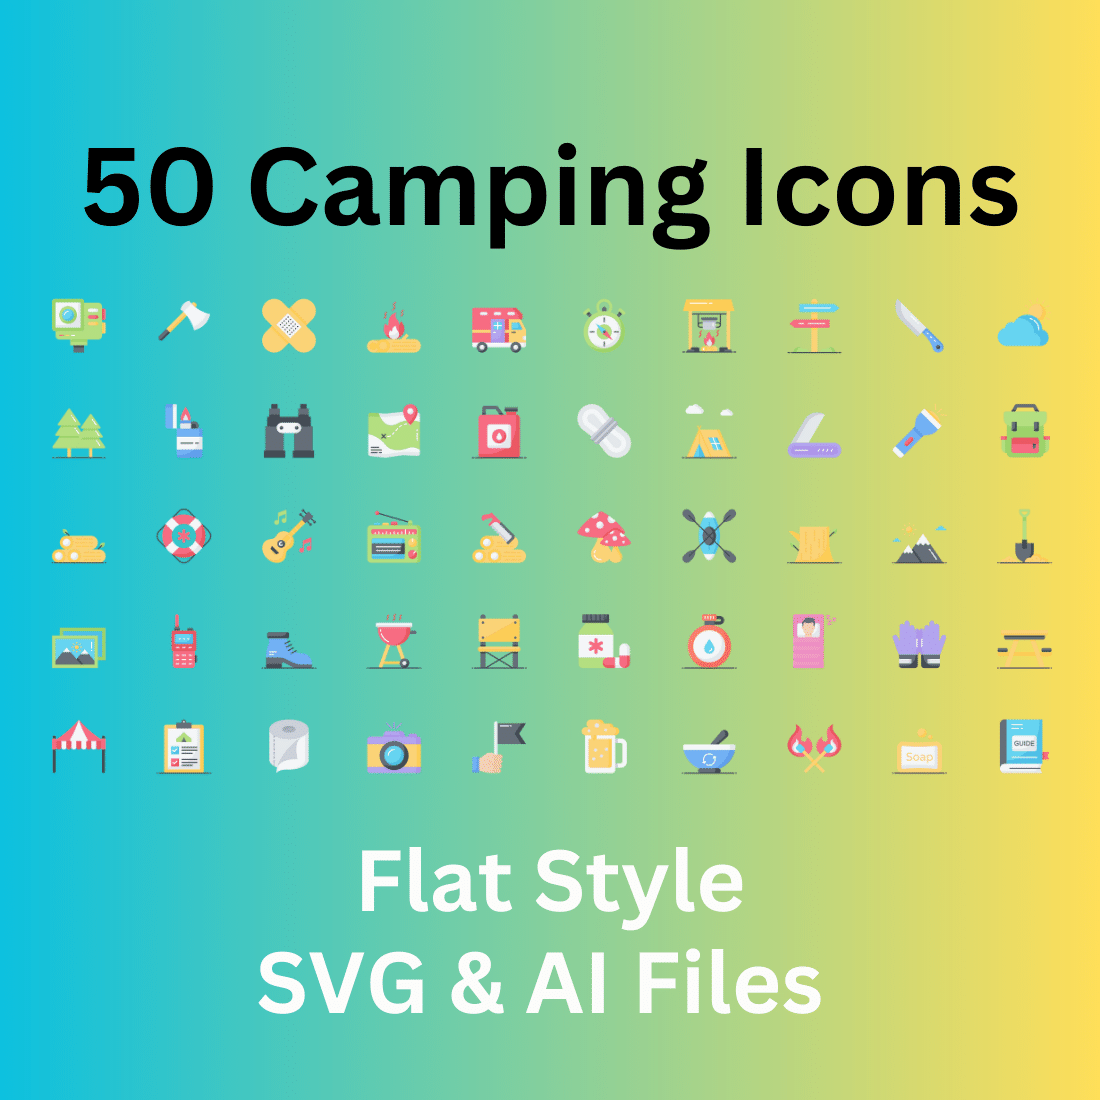 Camping Icon Set 50 Flat Icons - SVG And AI Files cover image.